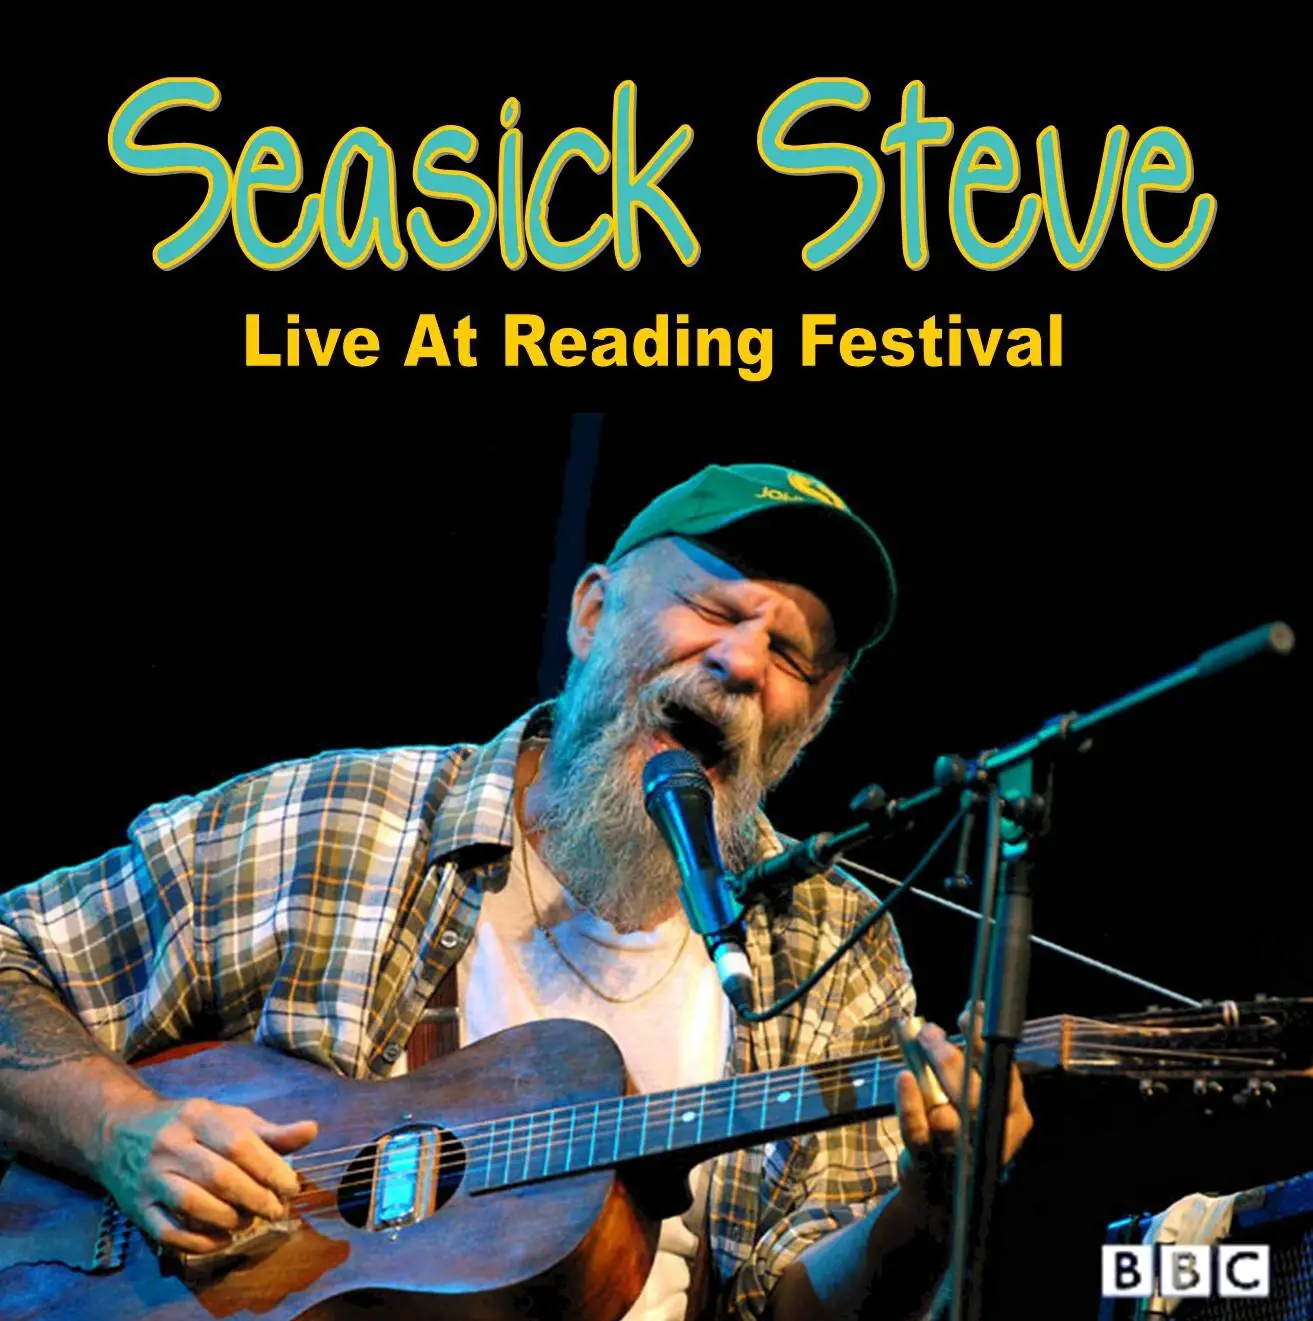 So Lonesome I Could Cry - Seasick Steve in Dropped D